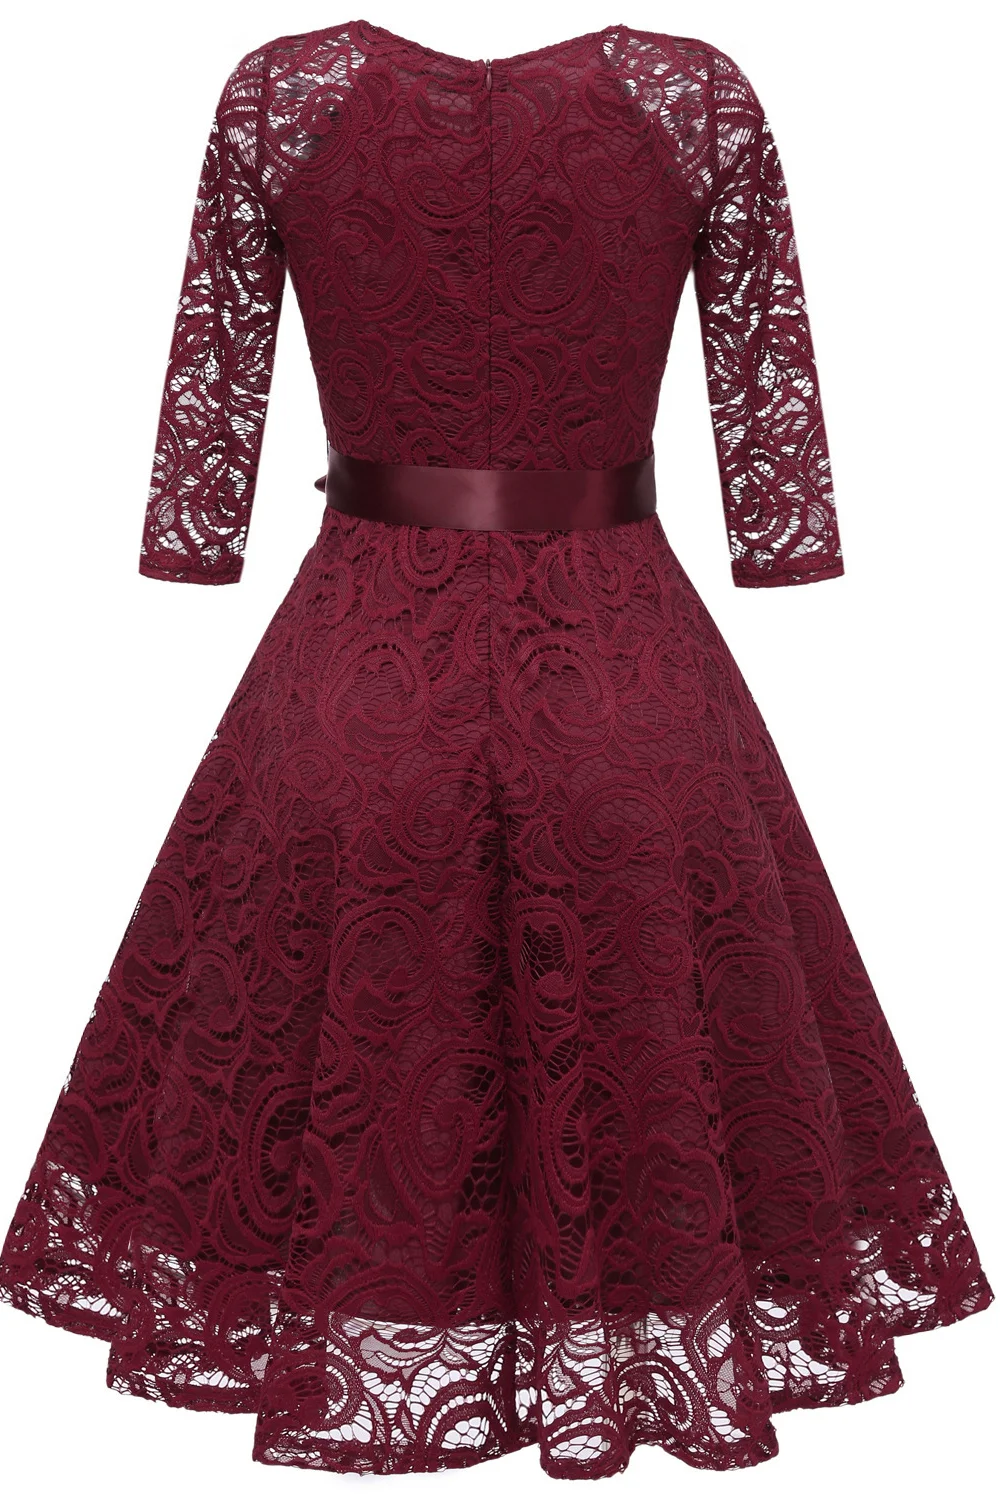 Gorgeous Lace Homecoming Dress With Sleeves Online